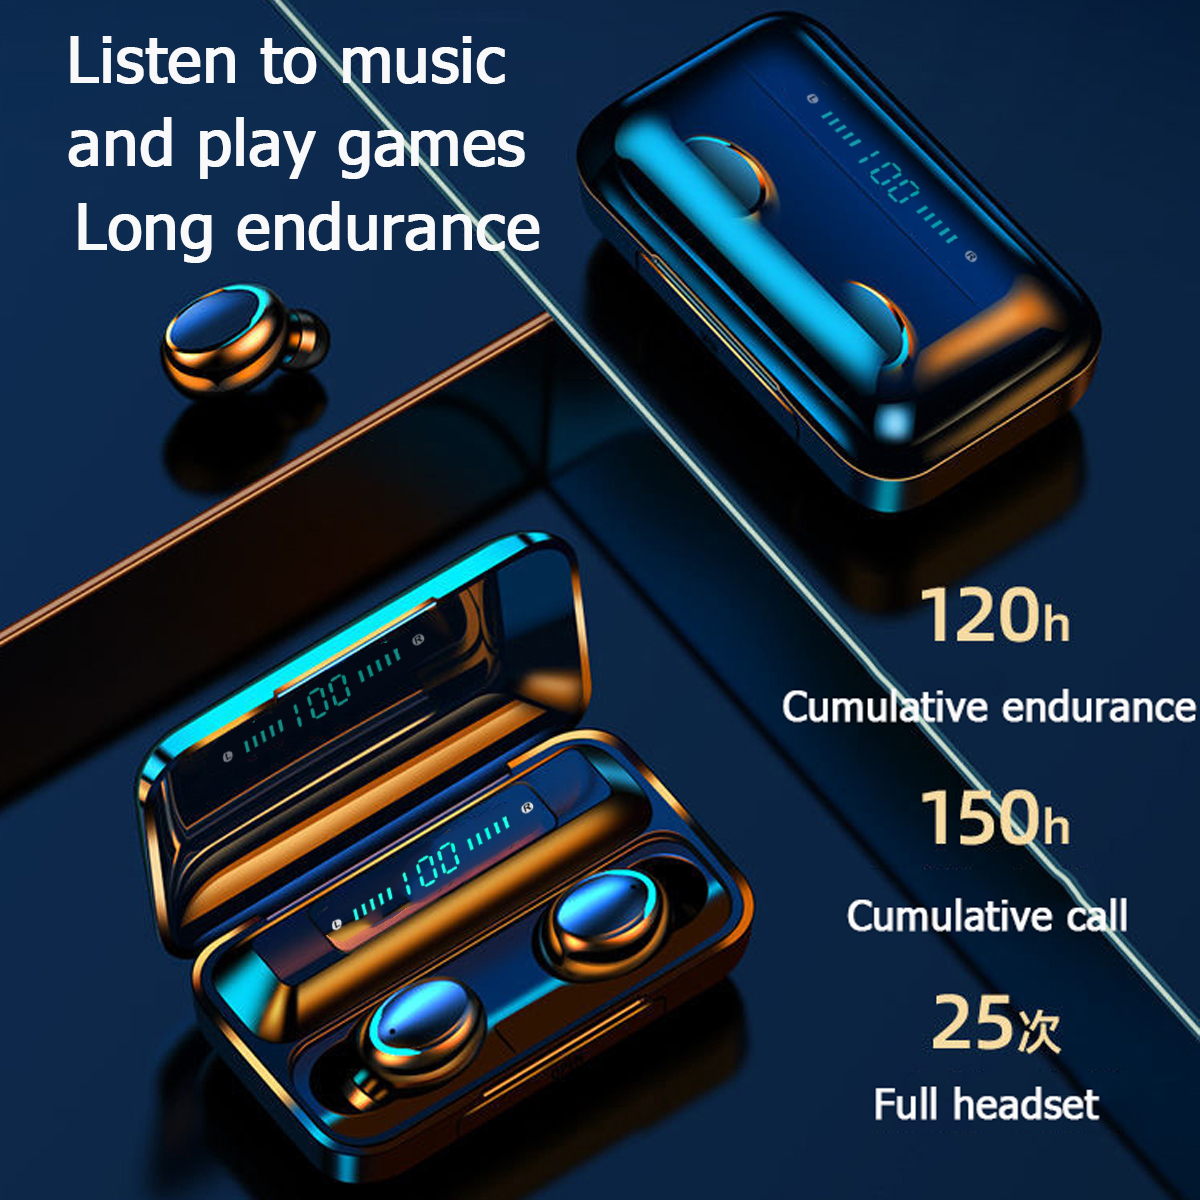 Bakeey-F9-Wireless-bluetooth-50-Earbuds-LED-Display-Headphones-Headset-Noise-Cancelling-Earphones-1898839-4